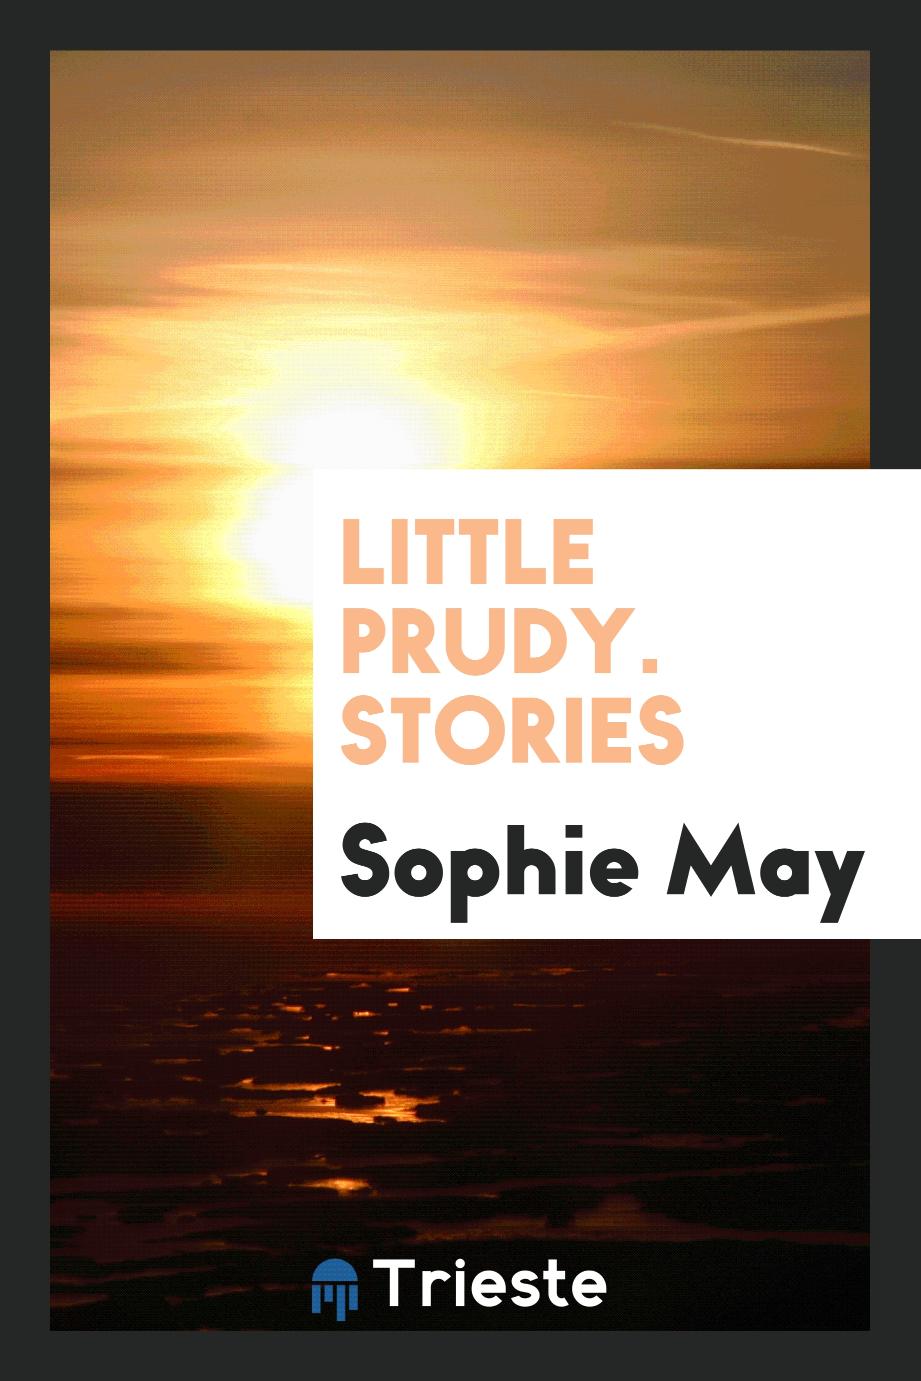 Little Prudy. Stories